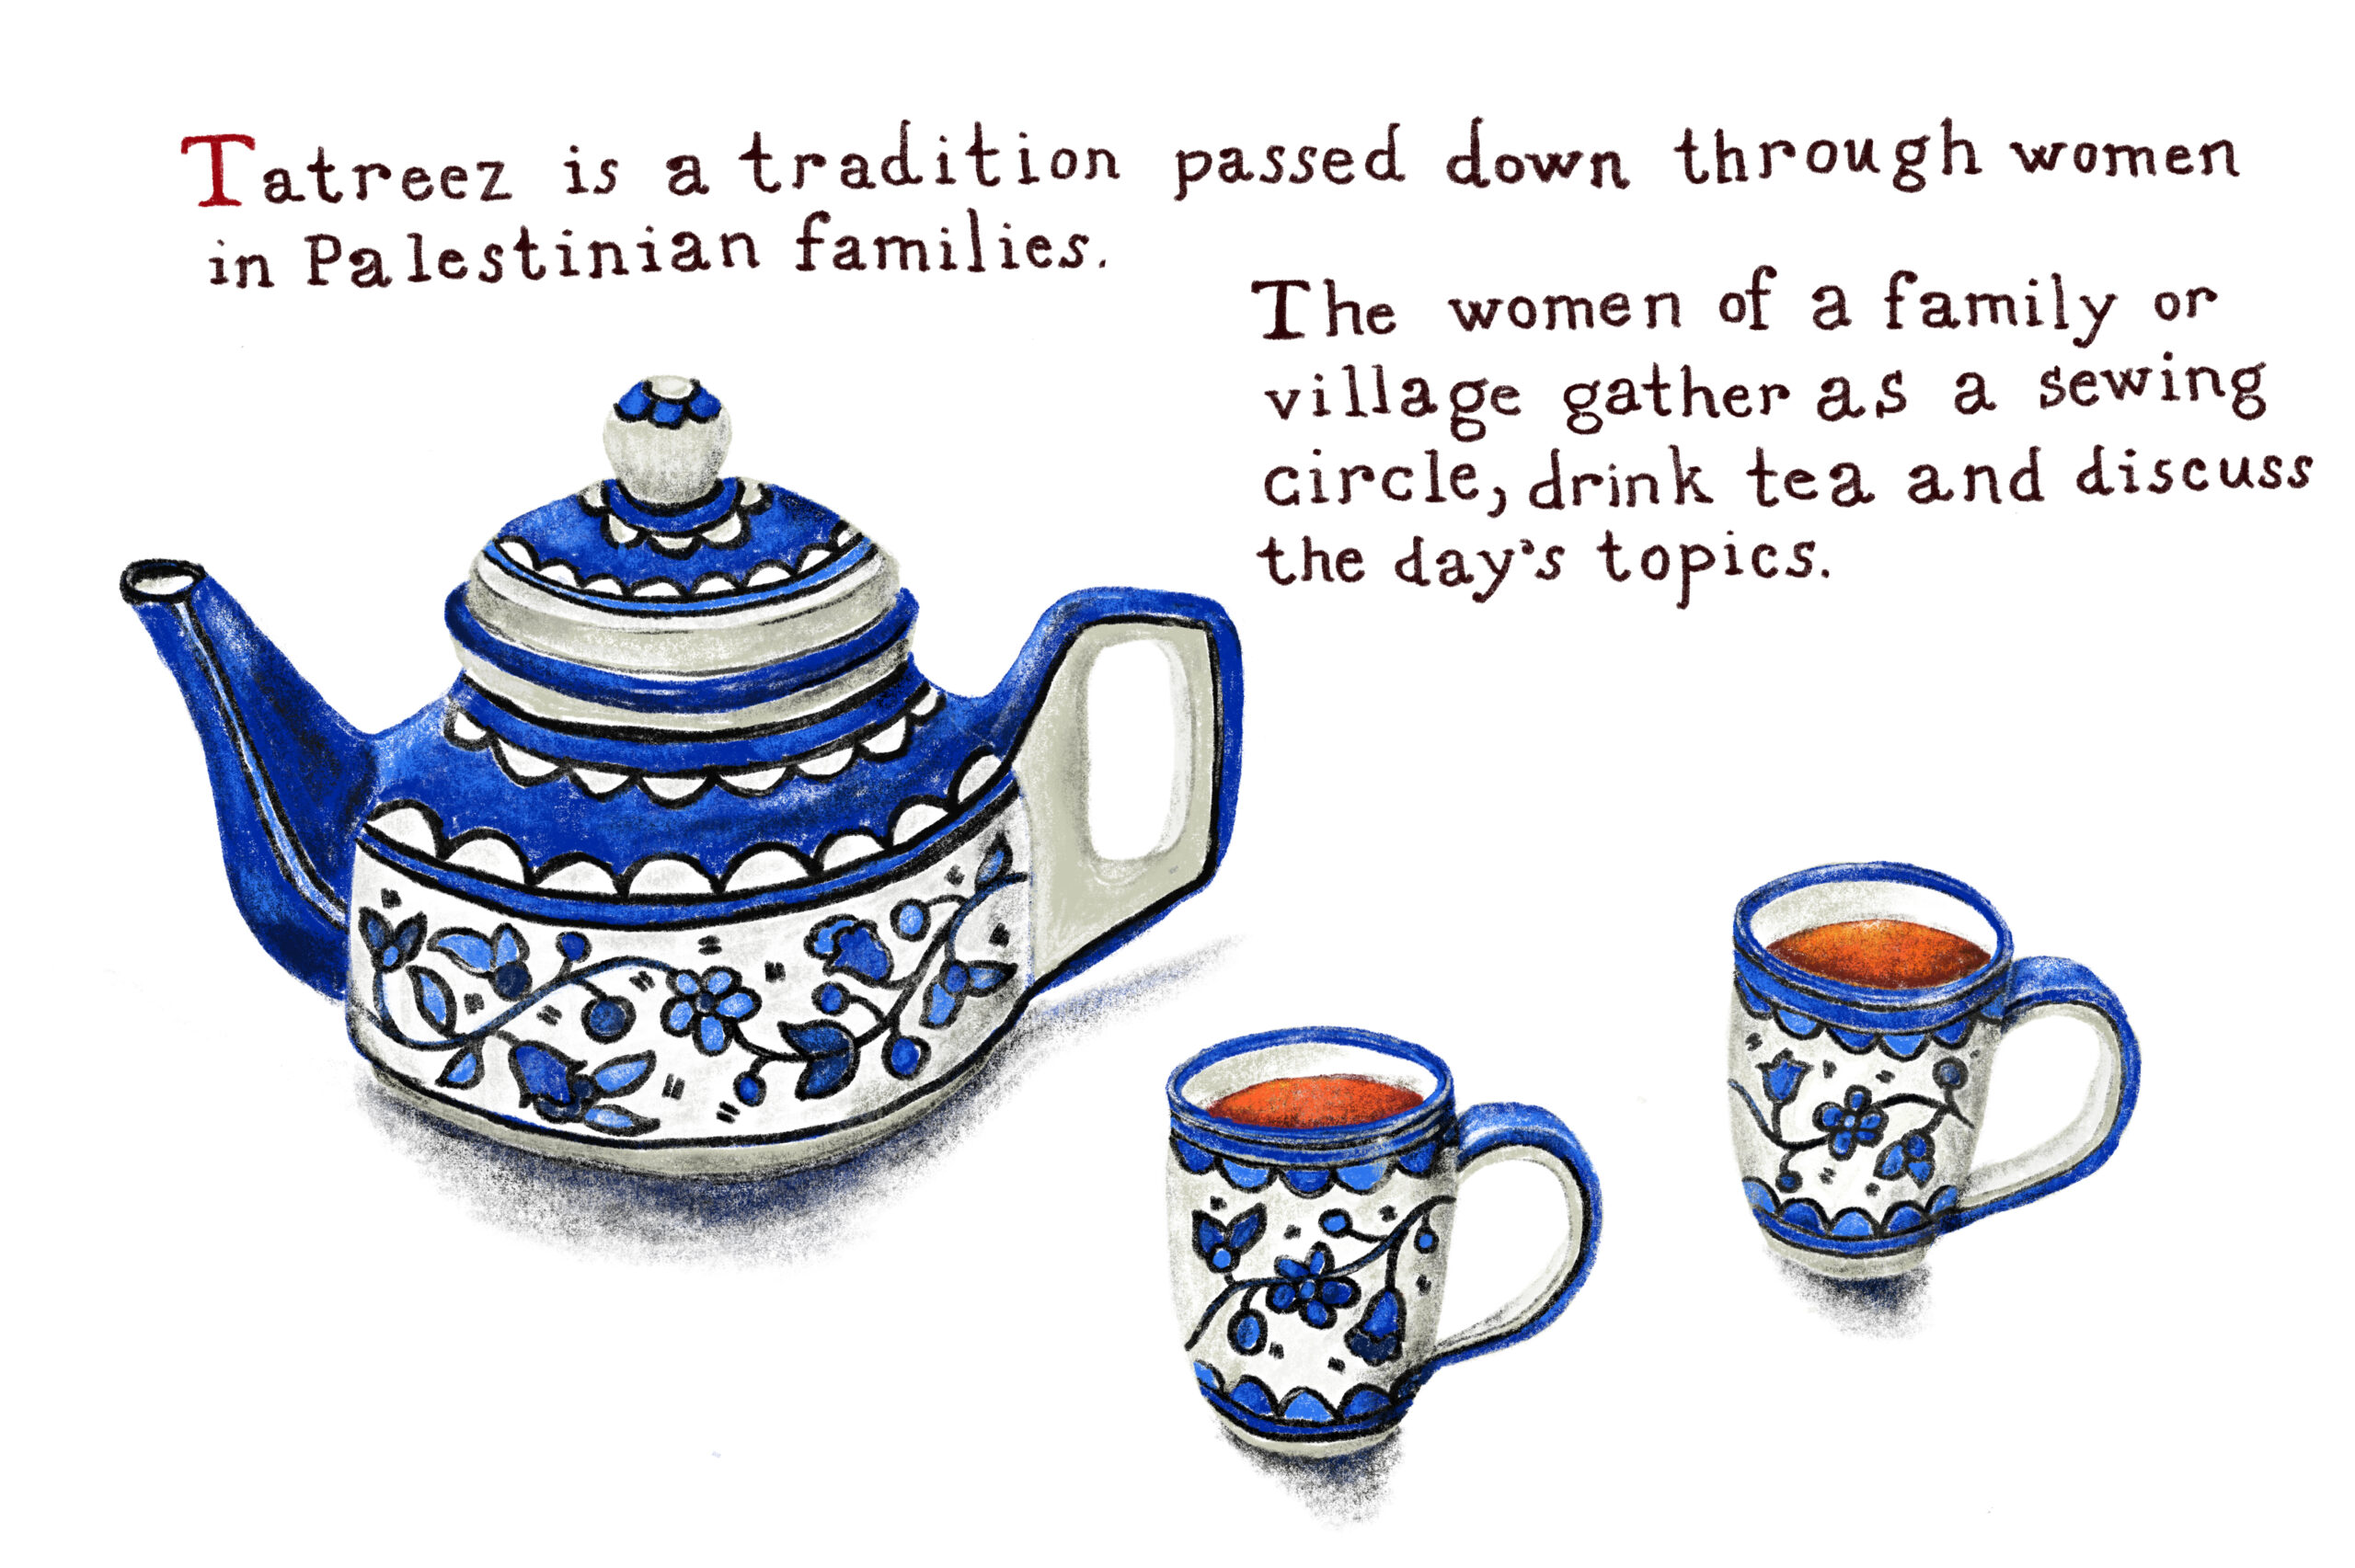 An illustration depicting a teapot and two tea mugs with blure floral design. There is text around the illustration that reads, "Tatreez is a tradition passed down through women in Palestinian families. The women of a family or village, gather as a sewing circle, drink tea and discuss the day's topics."